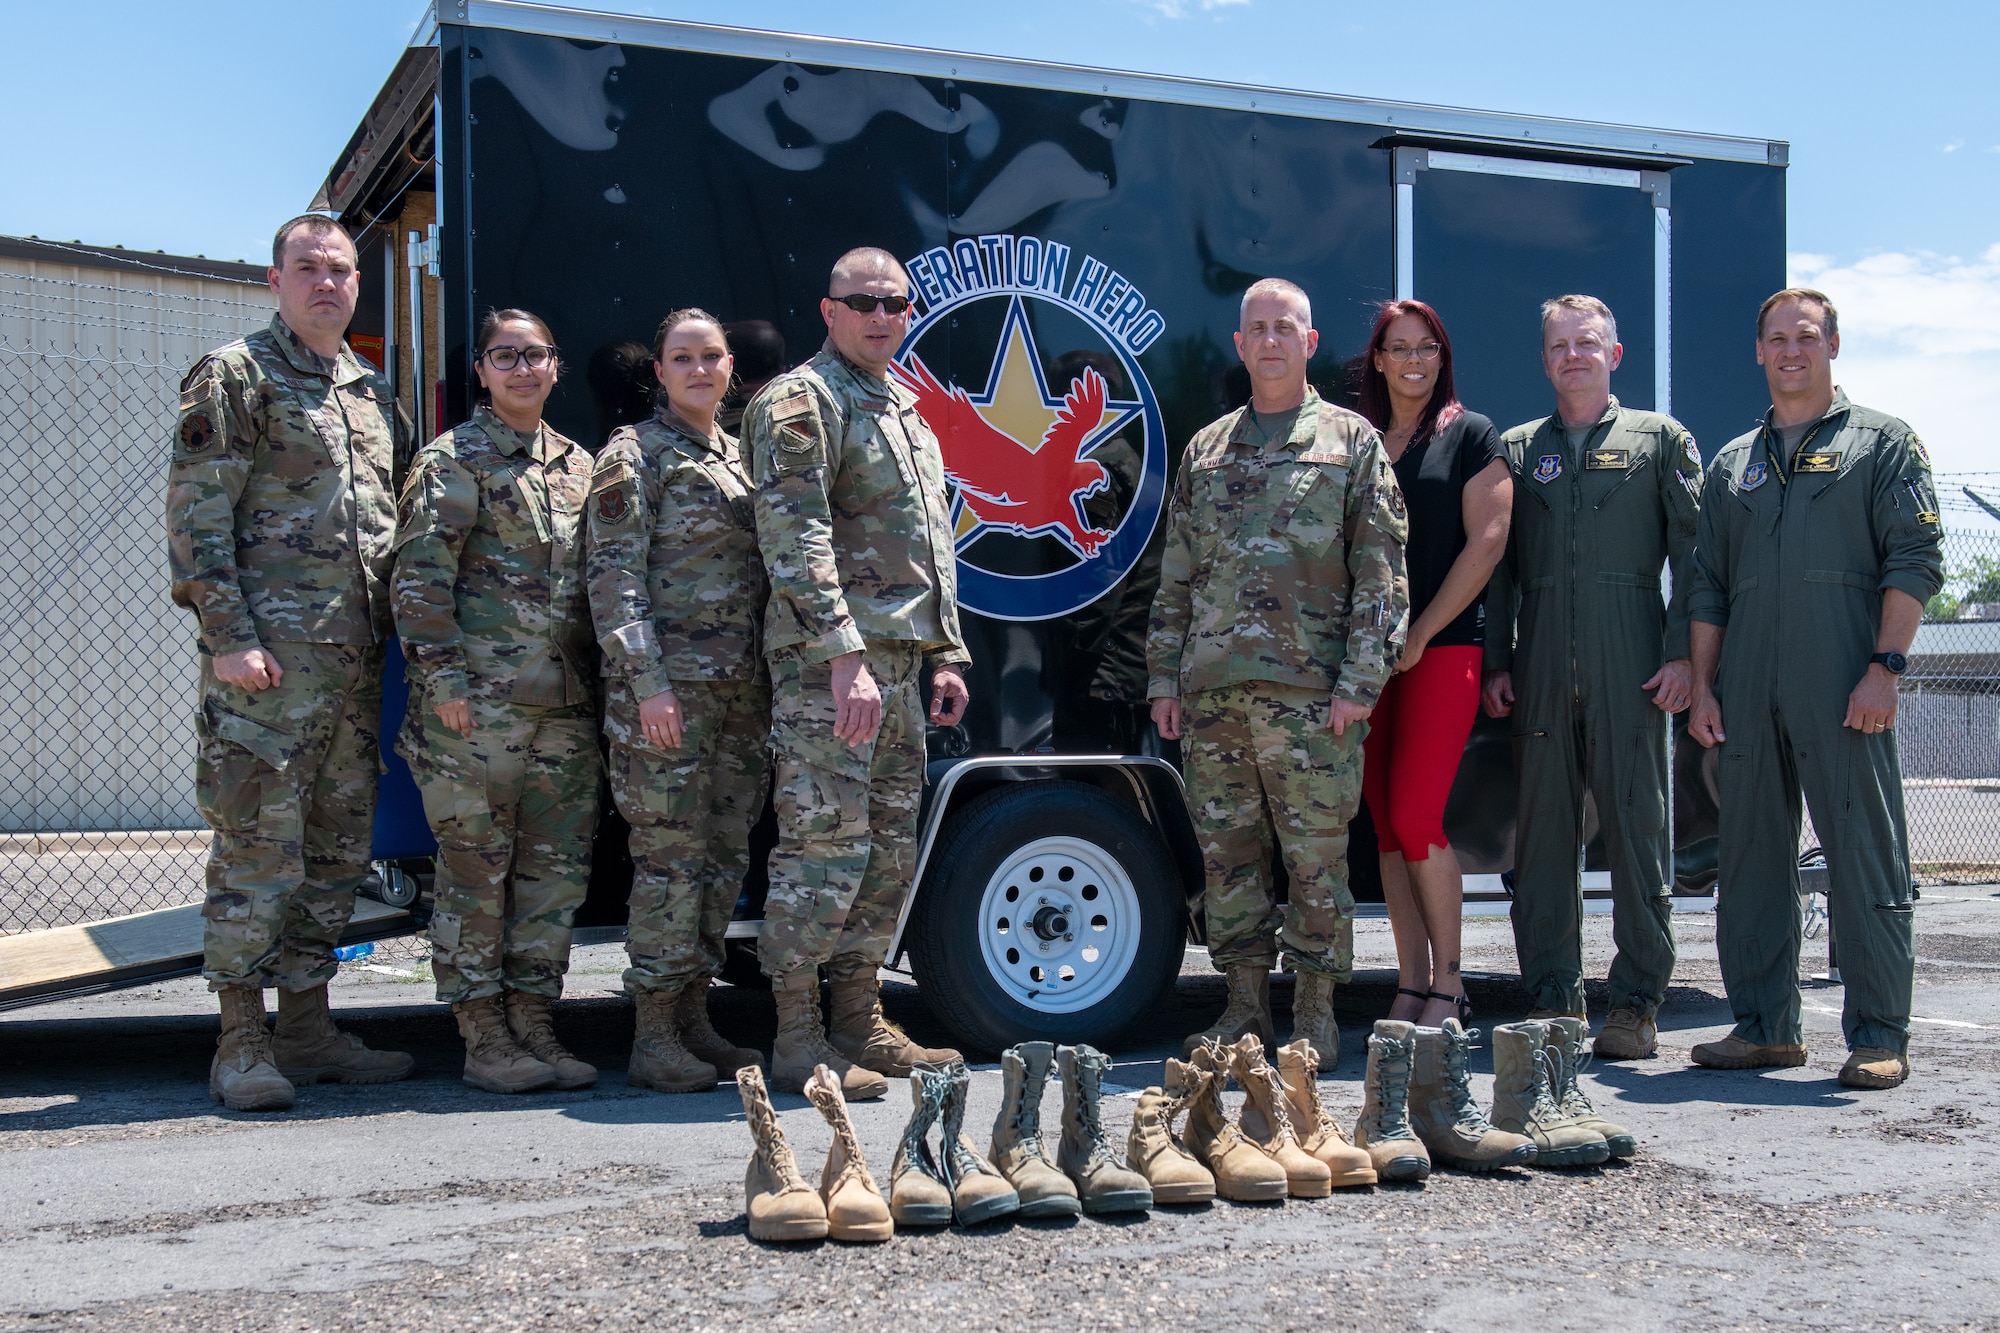 Col. Brett Newman, 419th Maintenance Group commander, poses with members from the 419th and 388th Fighter Wings in front of boots collected for the Operation Hero Boot Drive at Hill Air Force Base, Utah on July 7, 2021.